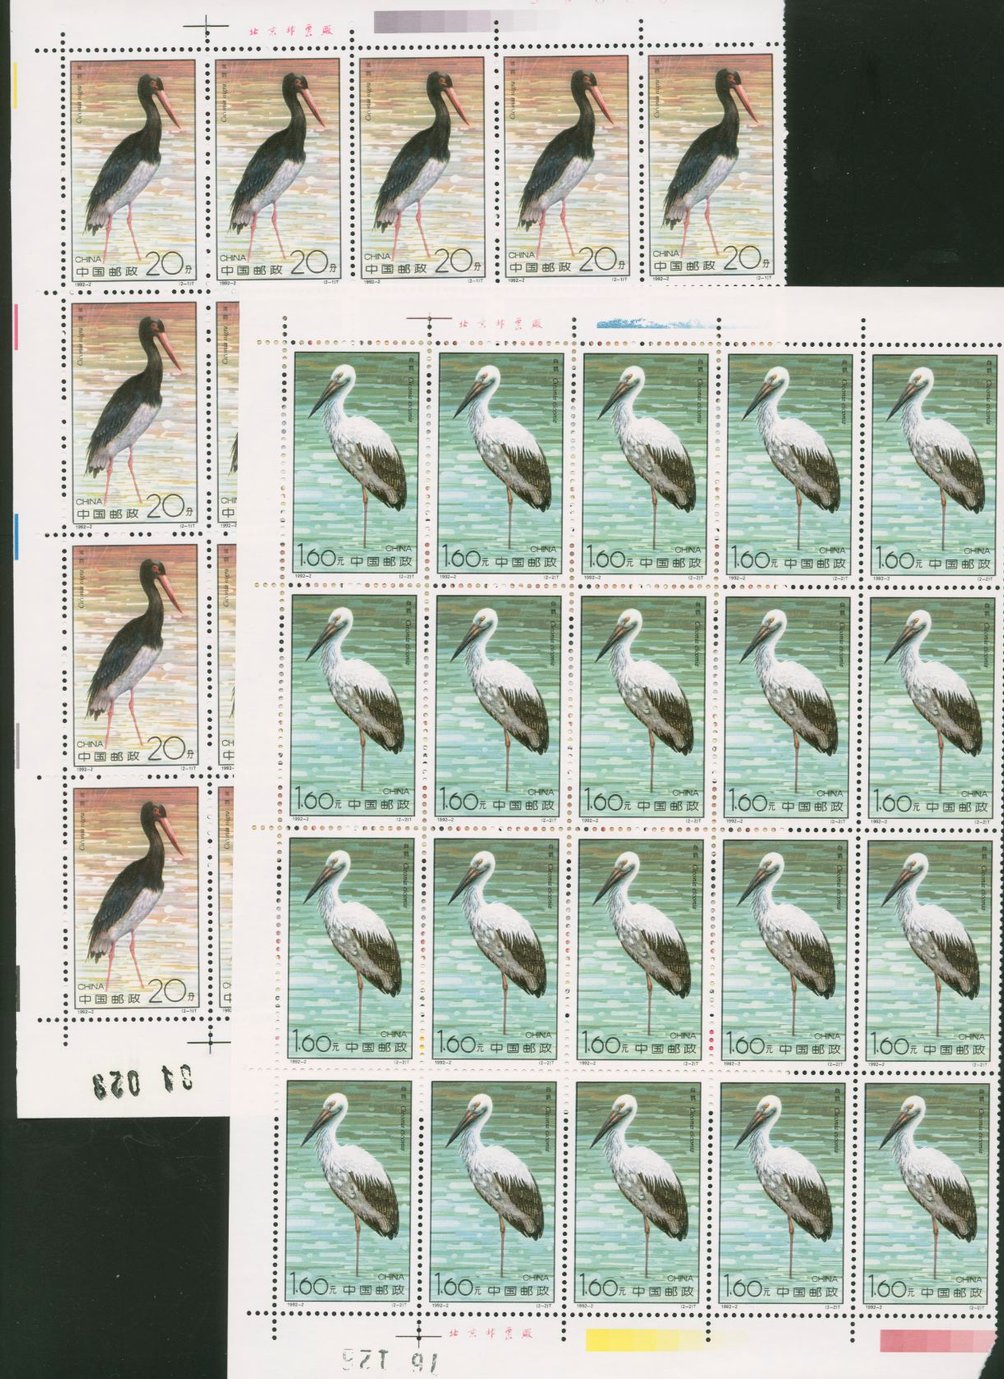 2380-81 PRC 1992-2 in panes of 20 (5 x 4)